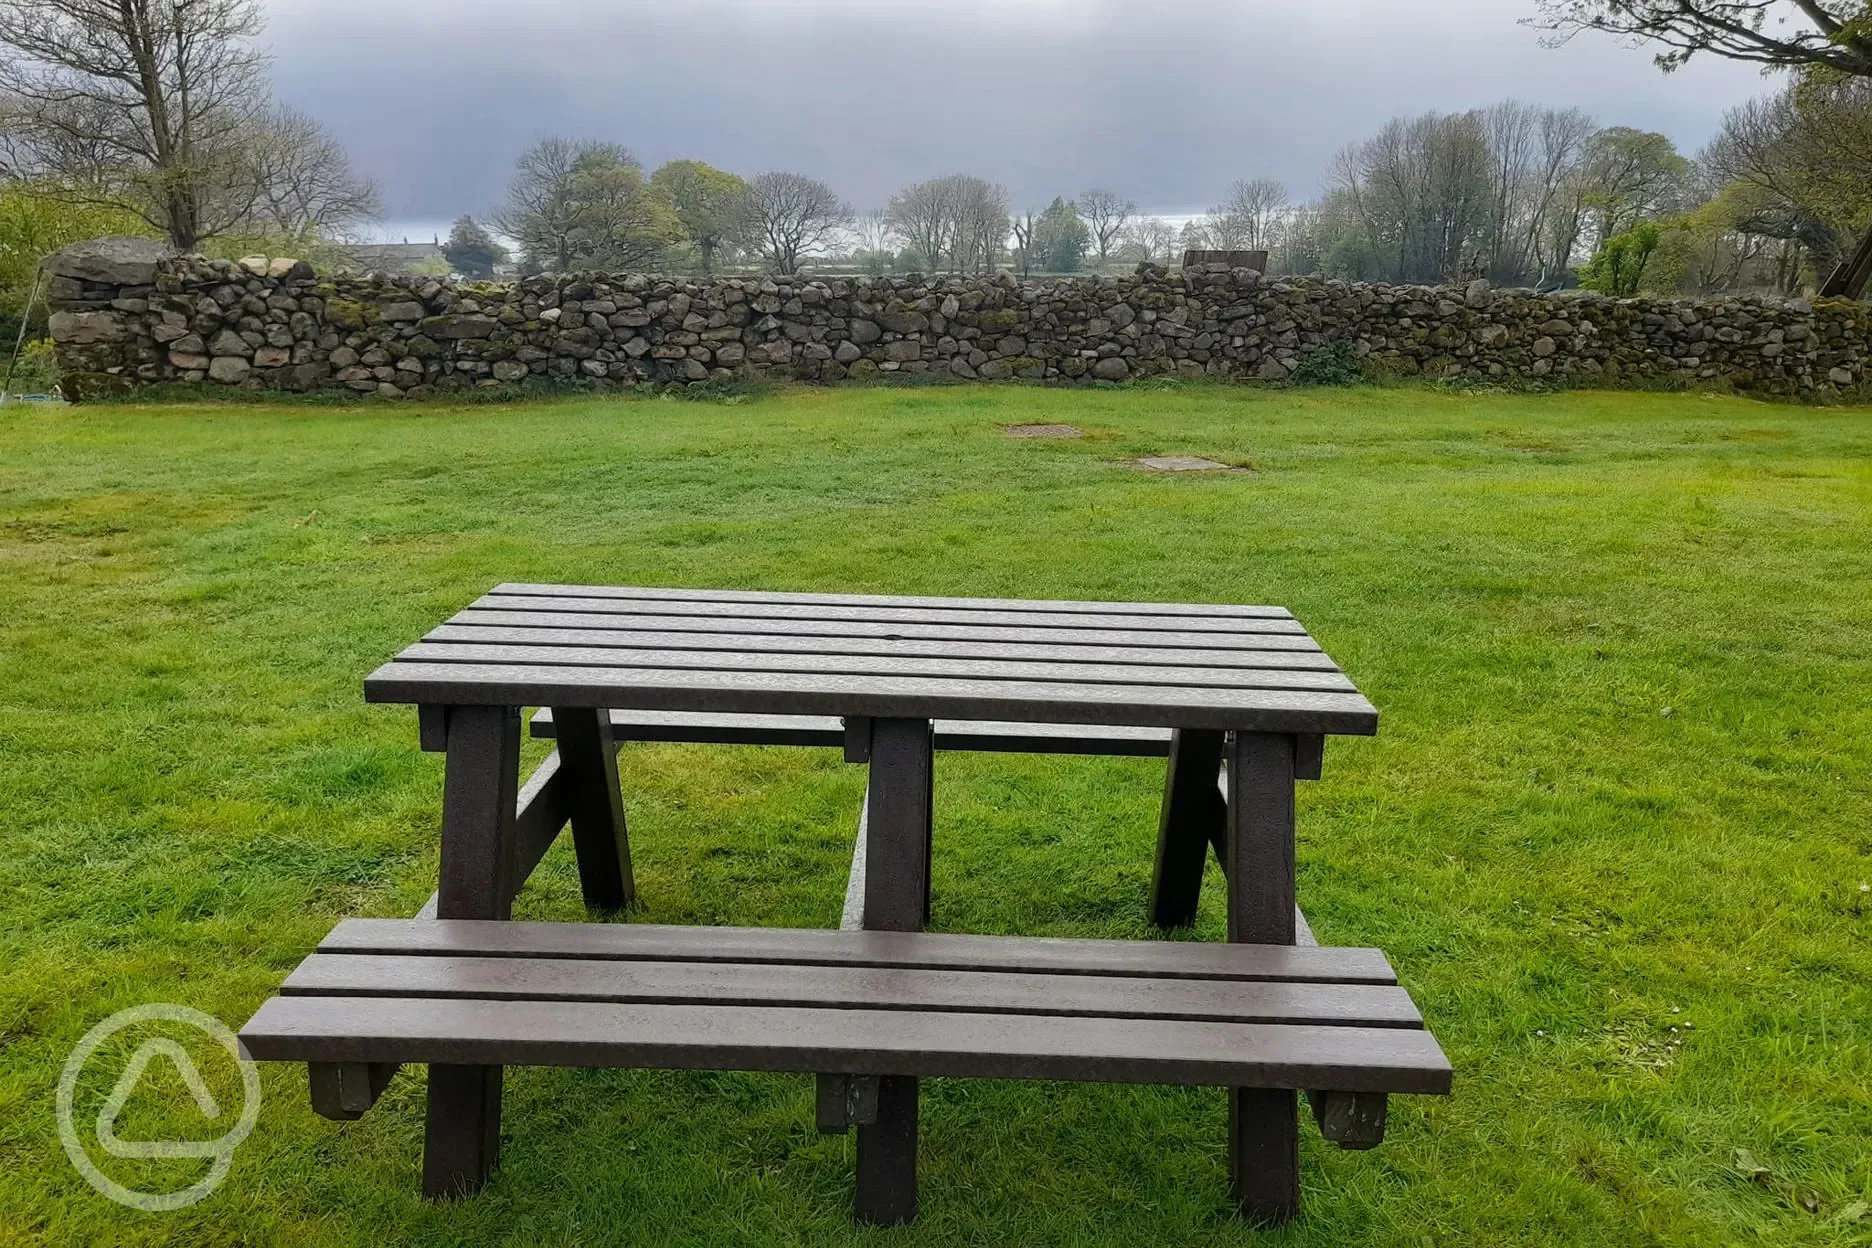 Pitches with picnic tables